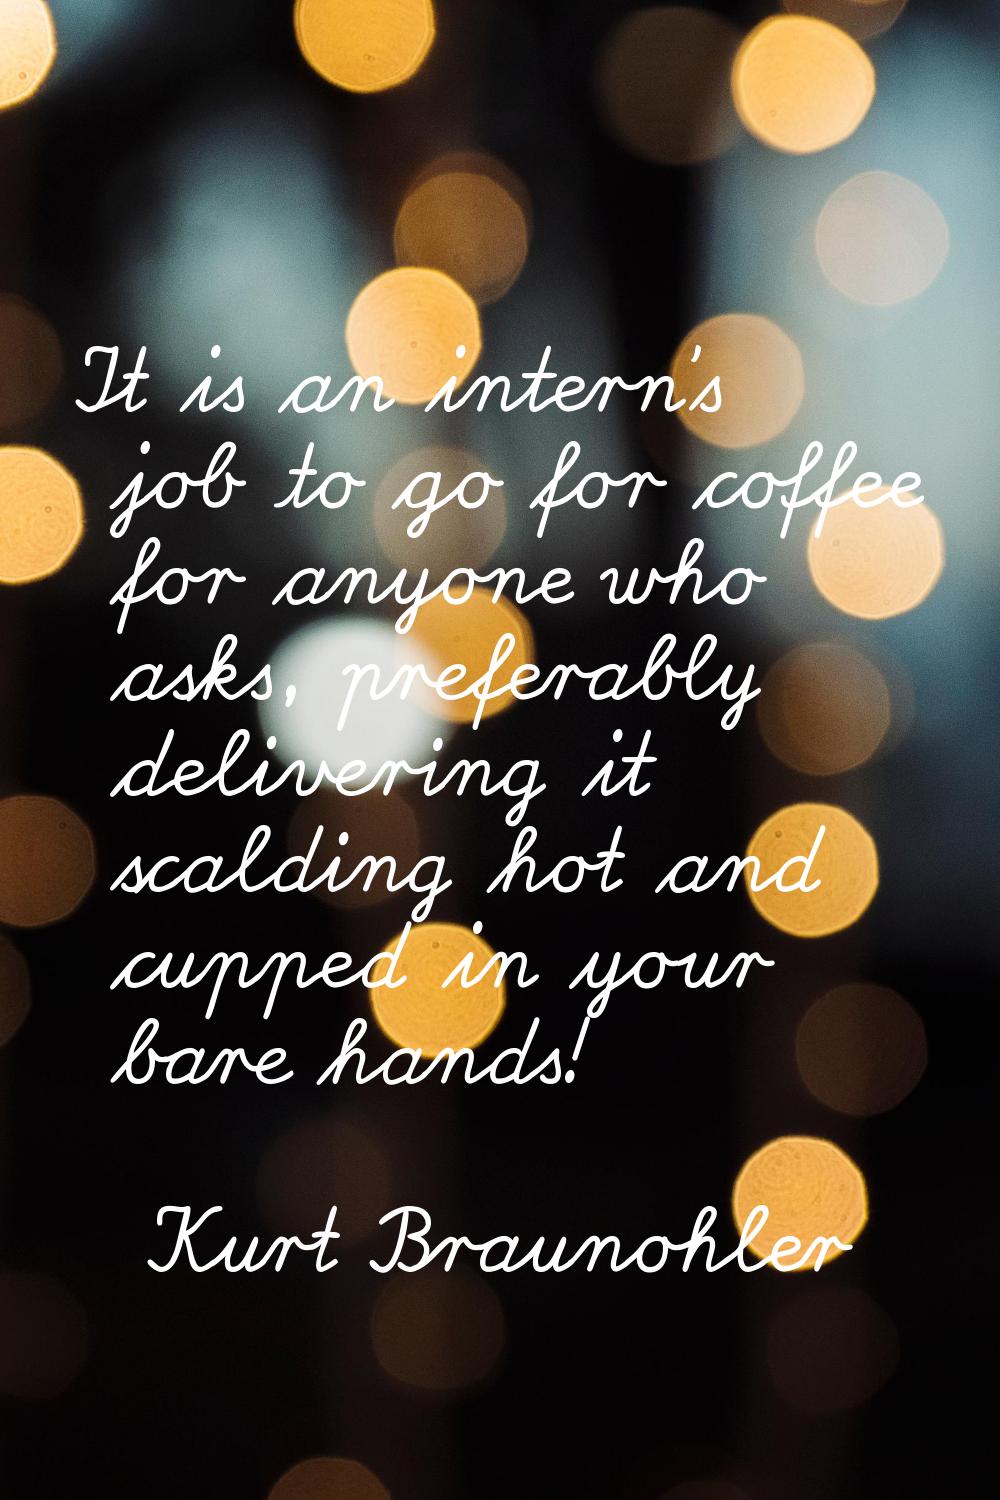 It is an intern's job to go for coffee for anyone who asks, preferably delivering it scalding hot a